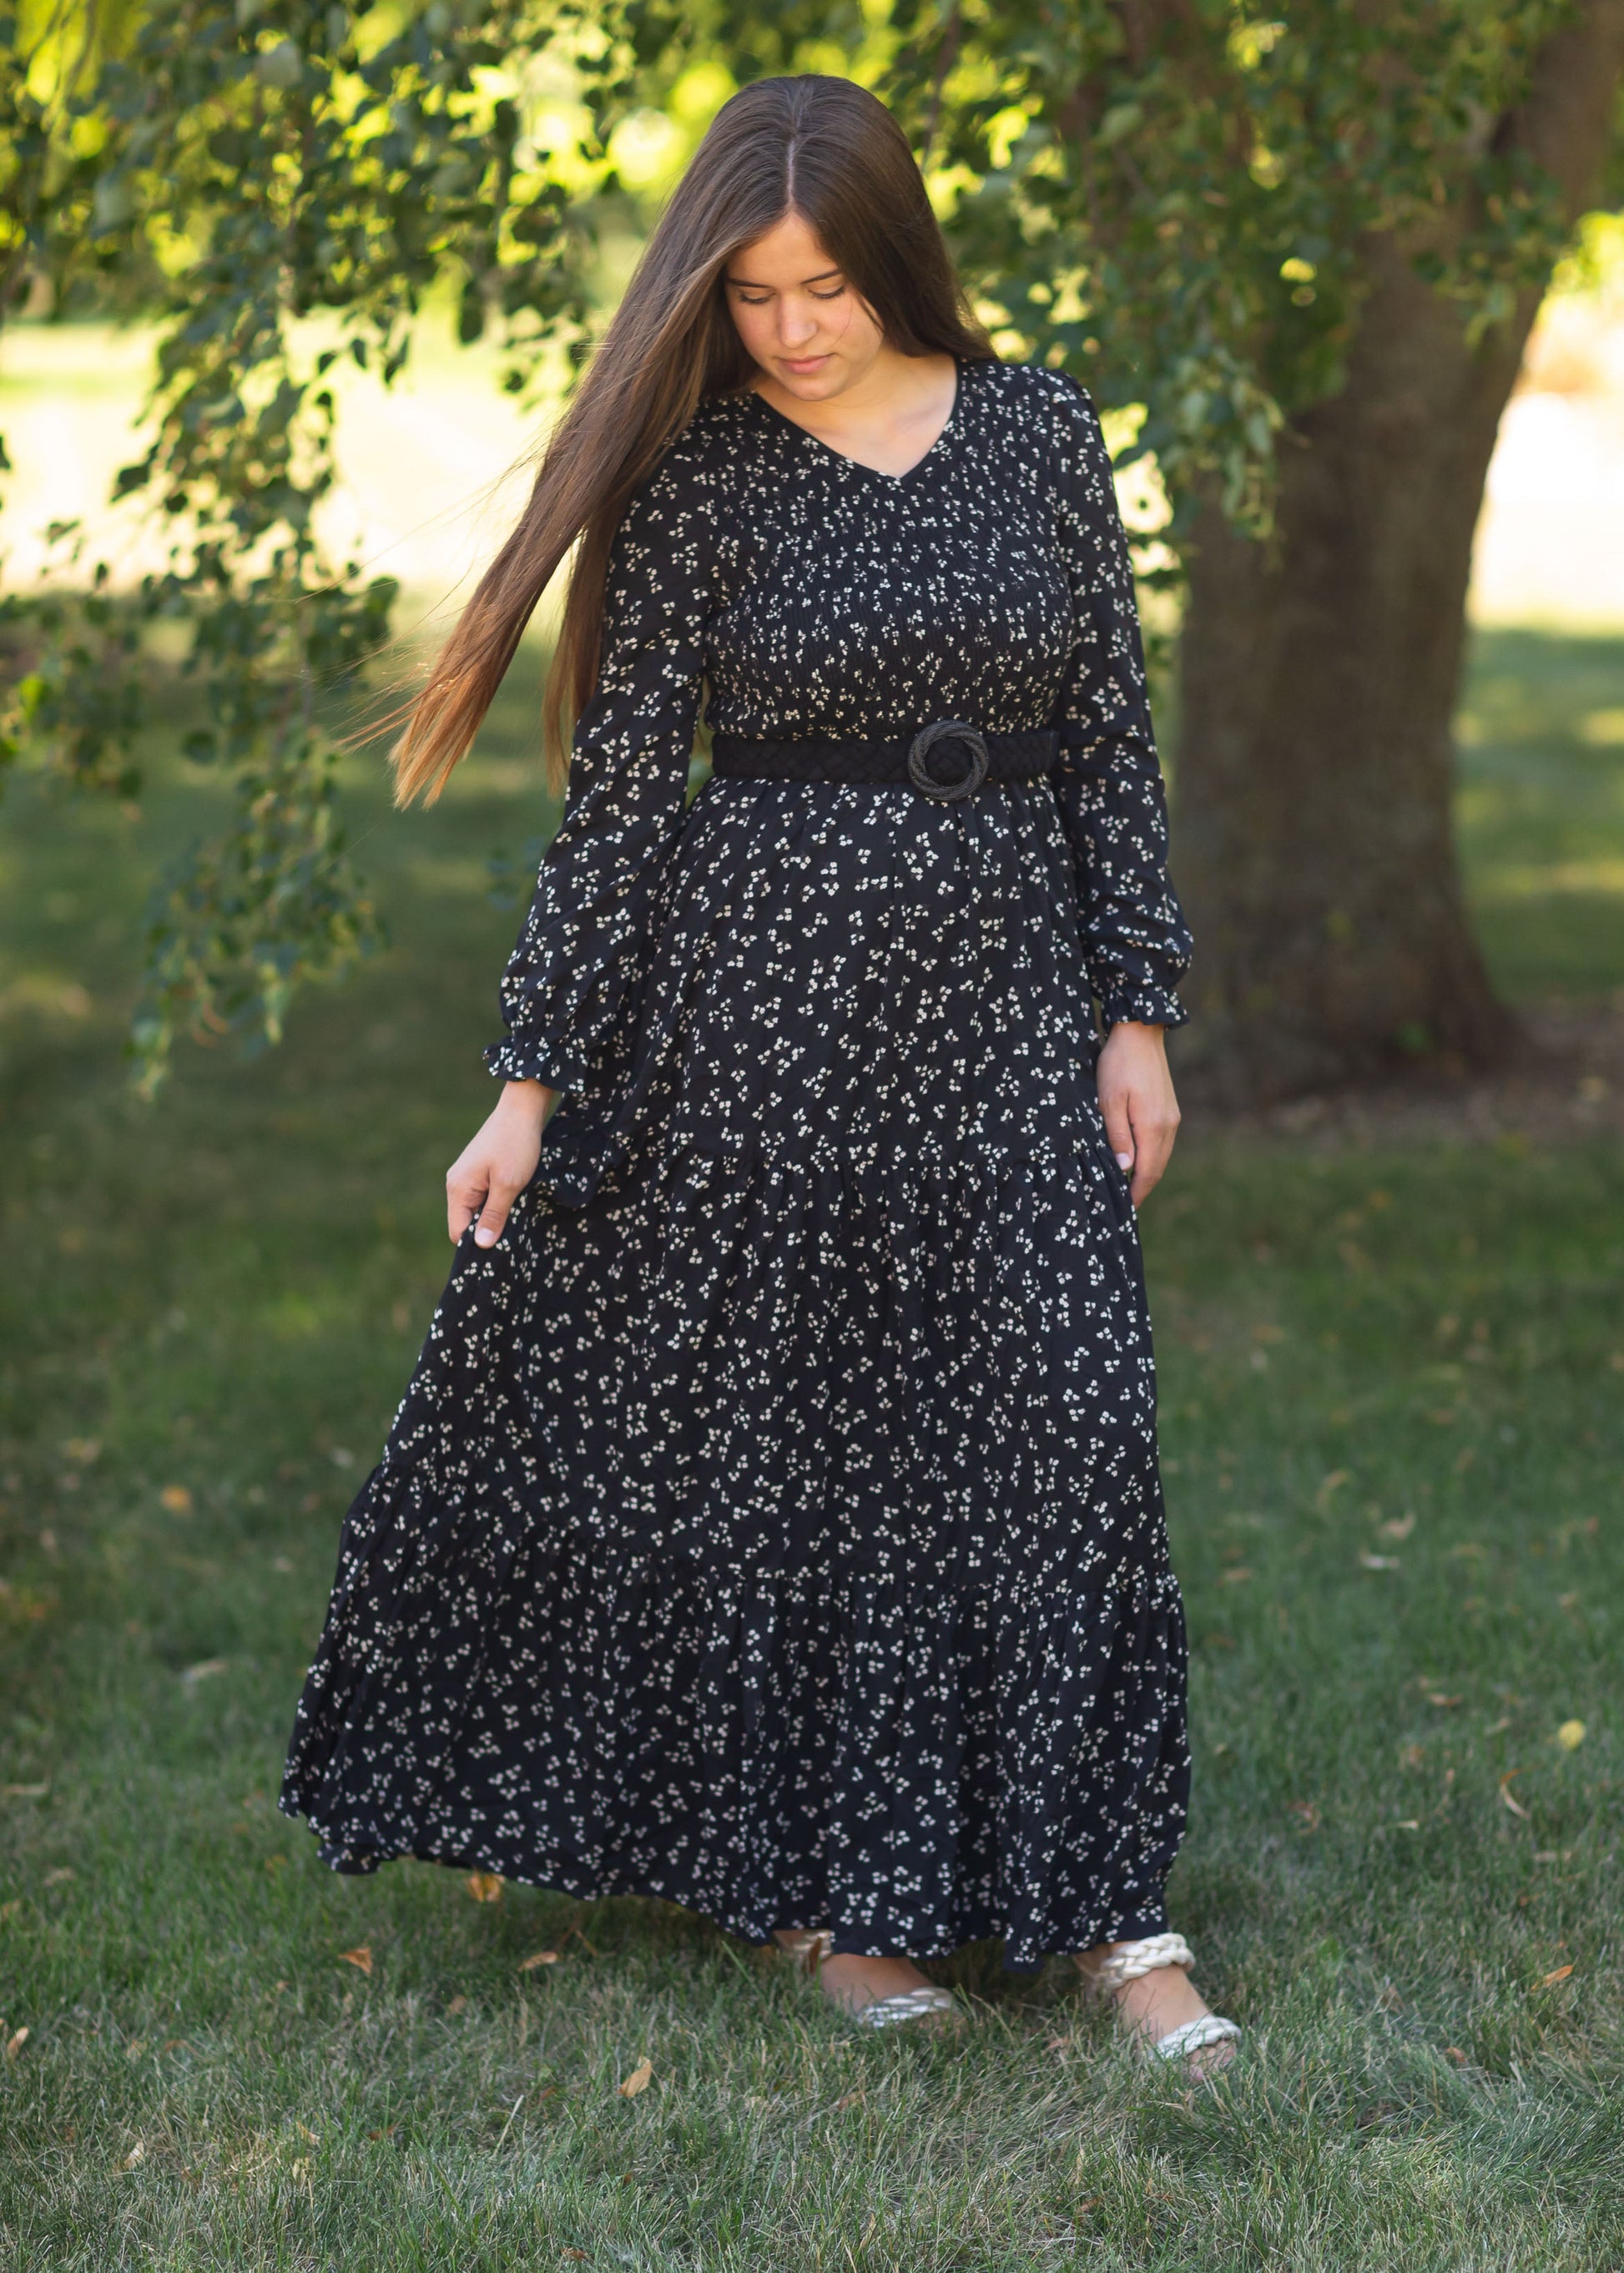 An Inherit Exclusive, the Aurora Floral Long Sleeve Maxi Dress is a fully lined true maxi dress we know you're going to love! This dress comes in either a black or ivory base with an allover floral pattern. The skirt has subtle tiers and the ruffle detail on the sleeves add a touch of flair. The smocked bodice in very comfortable and the modest v-neck adds a feminine touch!